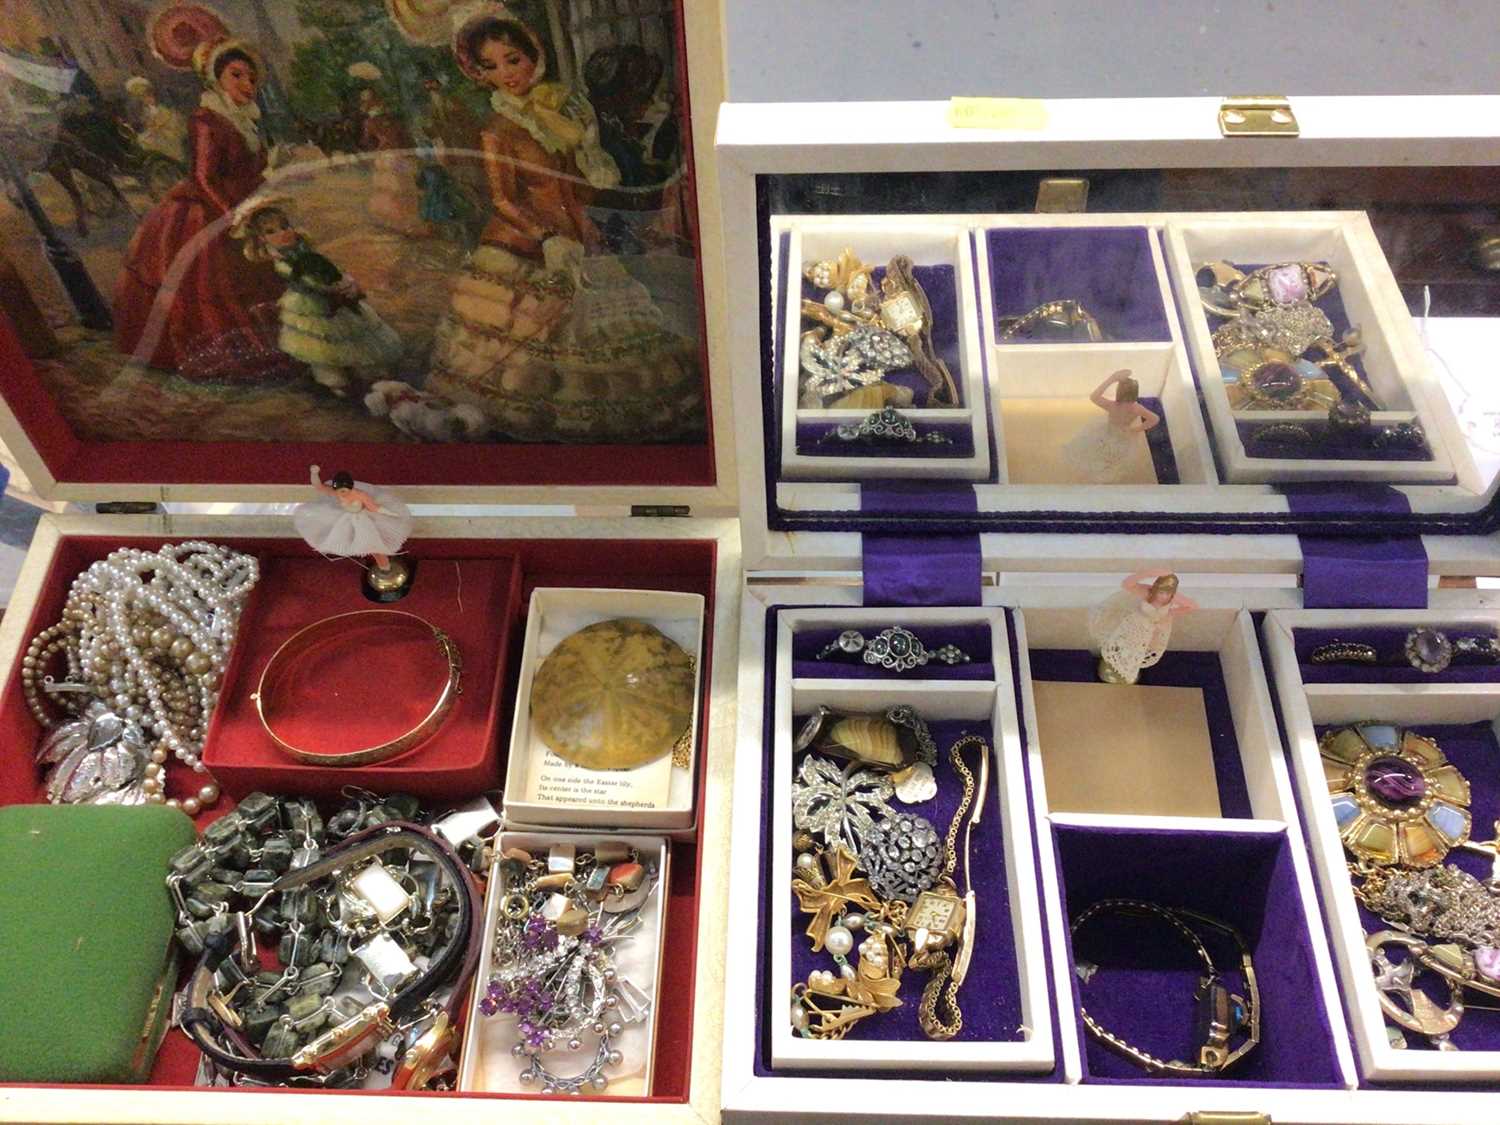 Lot 832 - Two jewellery boxes containing 18ct gold sapphire seven stone ring, two 9ct gold gem set dress rings, other costume jewellery and wristwatches